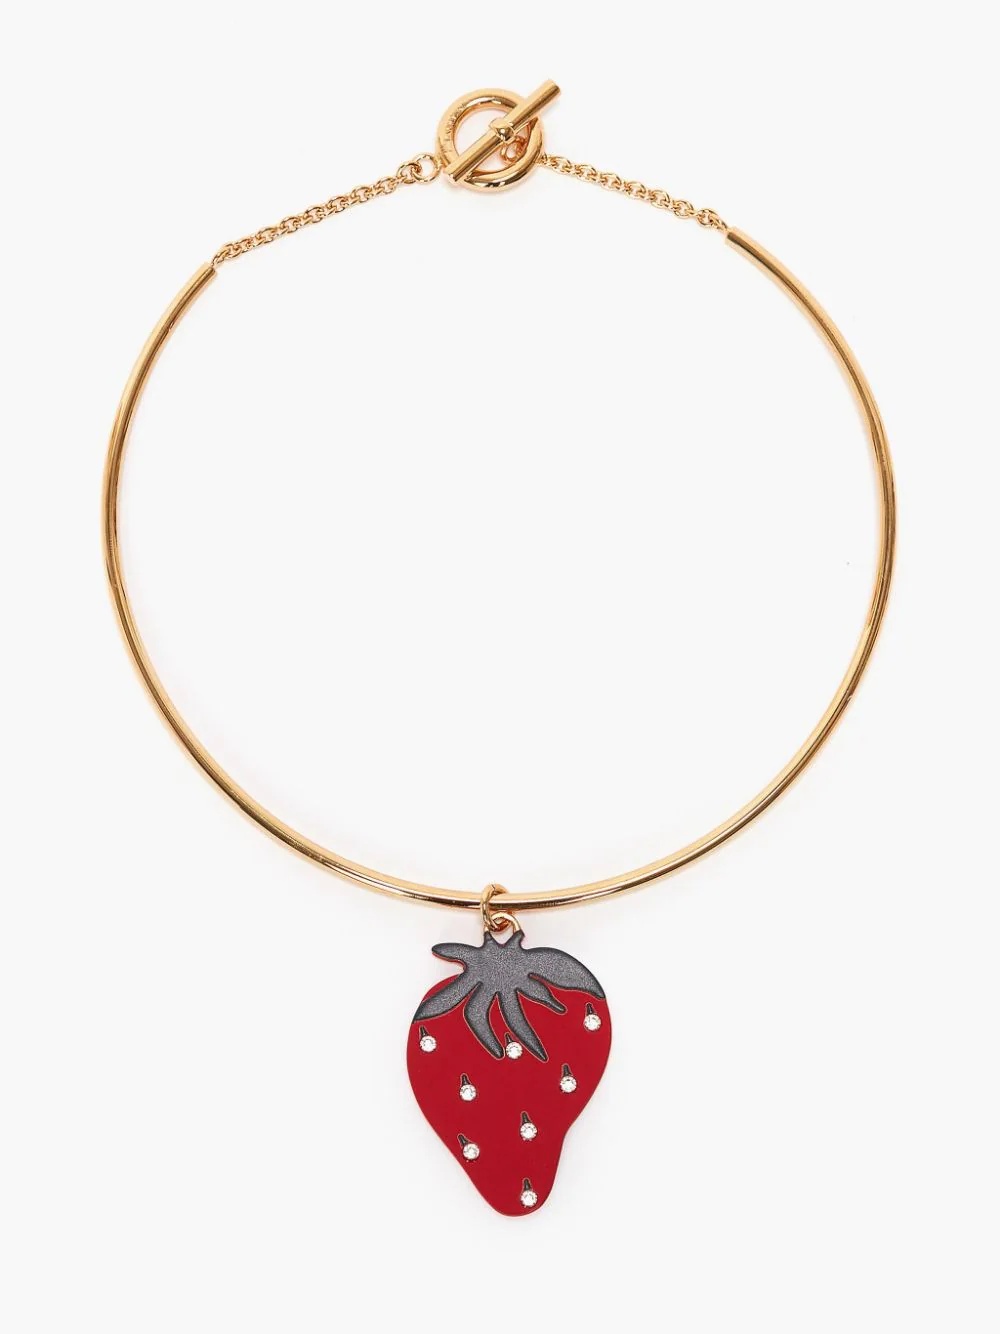 STRAWBERRY NECKLACE - 1